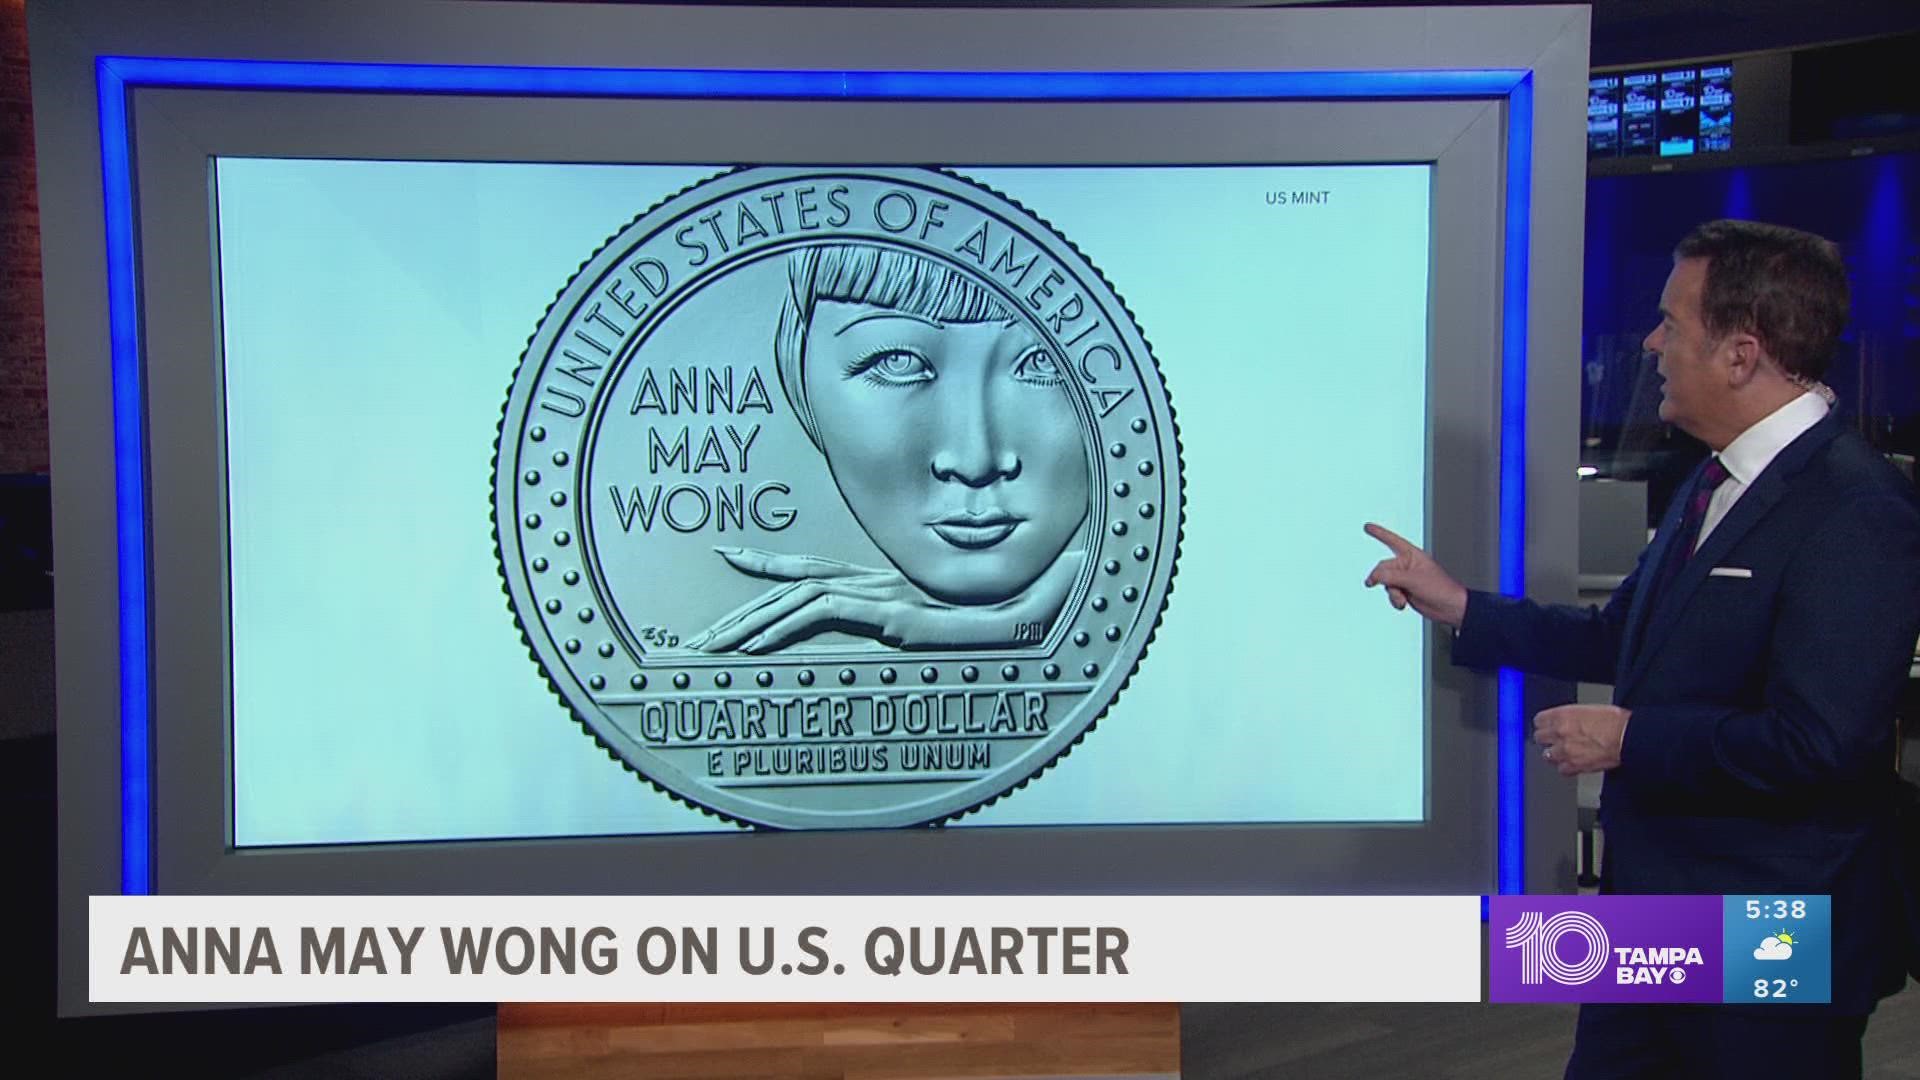 Anna May Wong, a Hollywood film star and a champion for better representation in the industry, will be the first Asian American featured on U.S. currency.